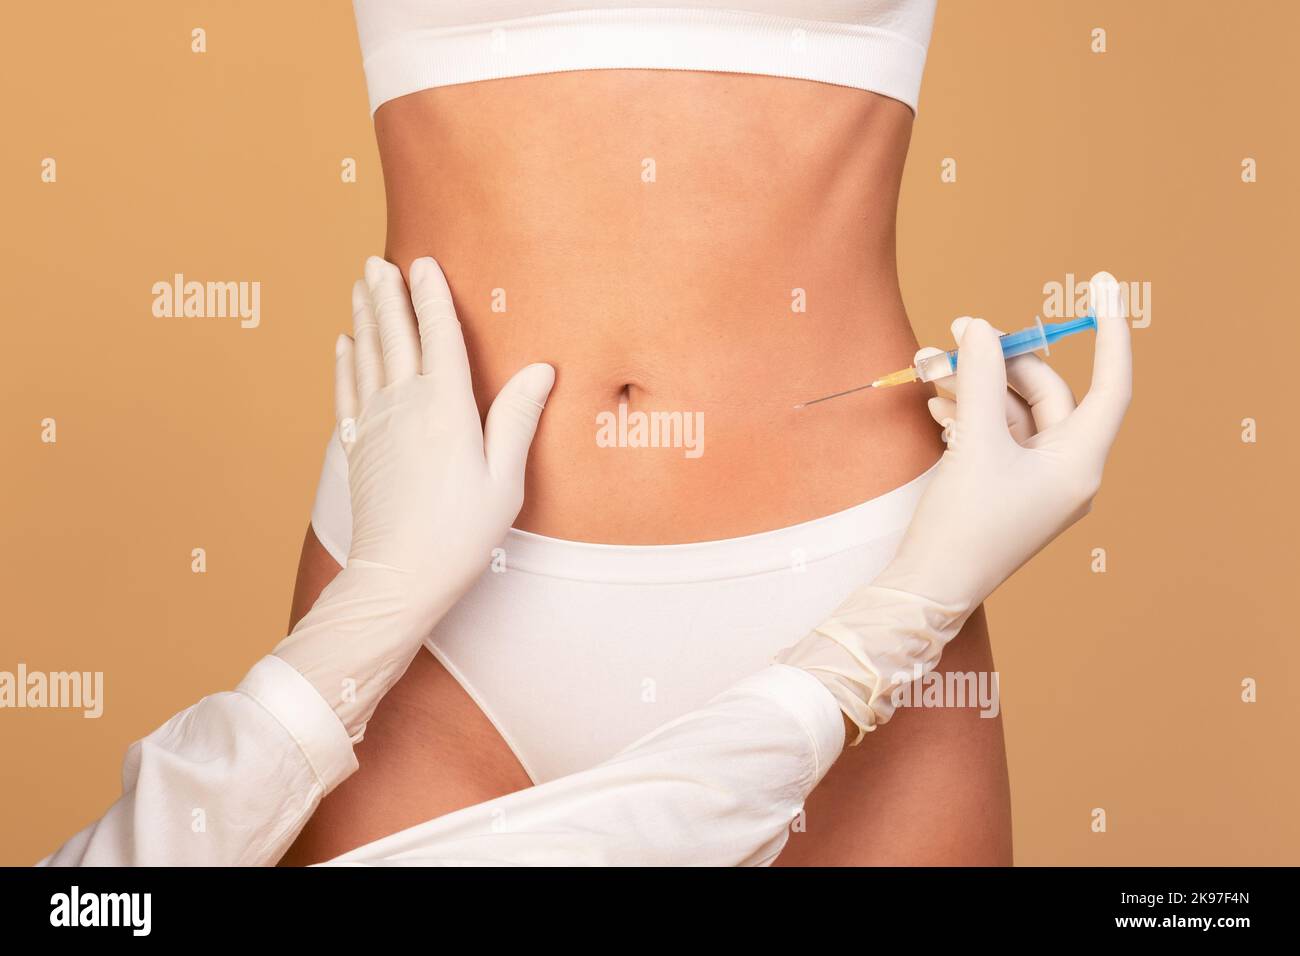 Beauty treatment. Closeup view of young fit woman getting injection in her belly area, having procedure in salon Stock Photo